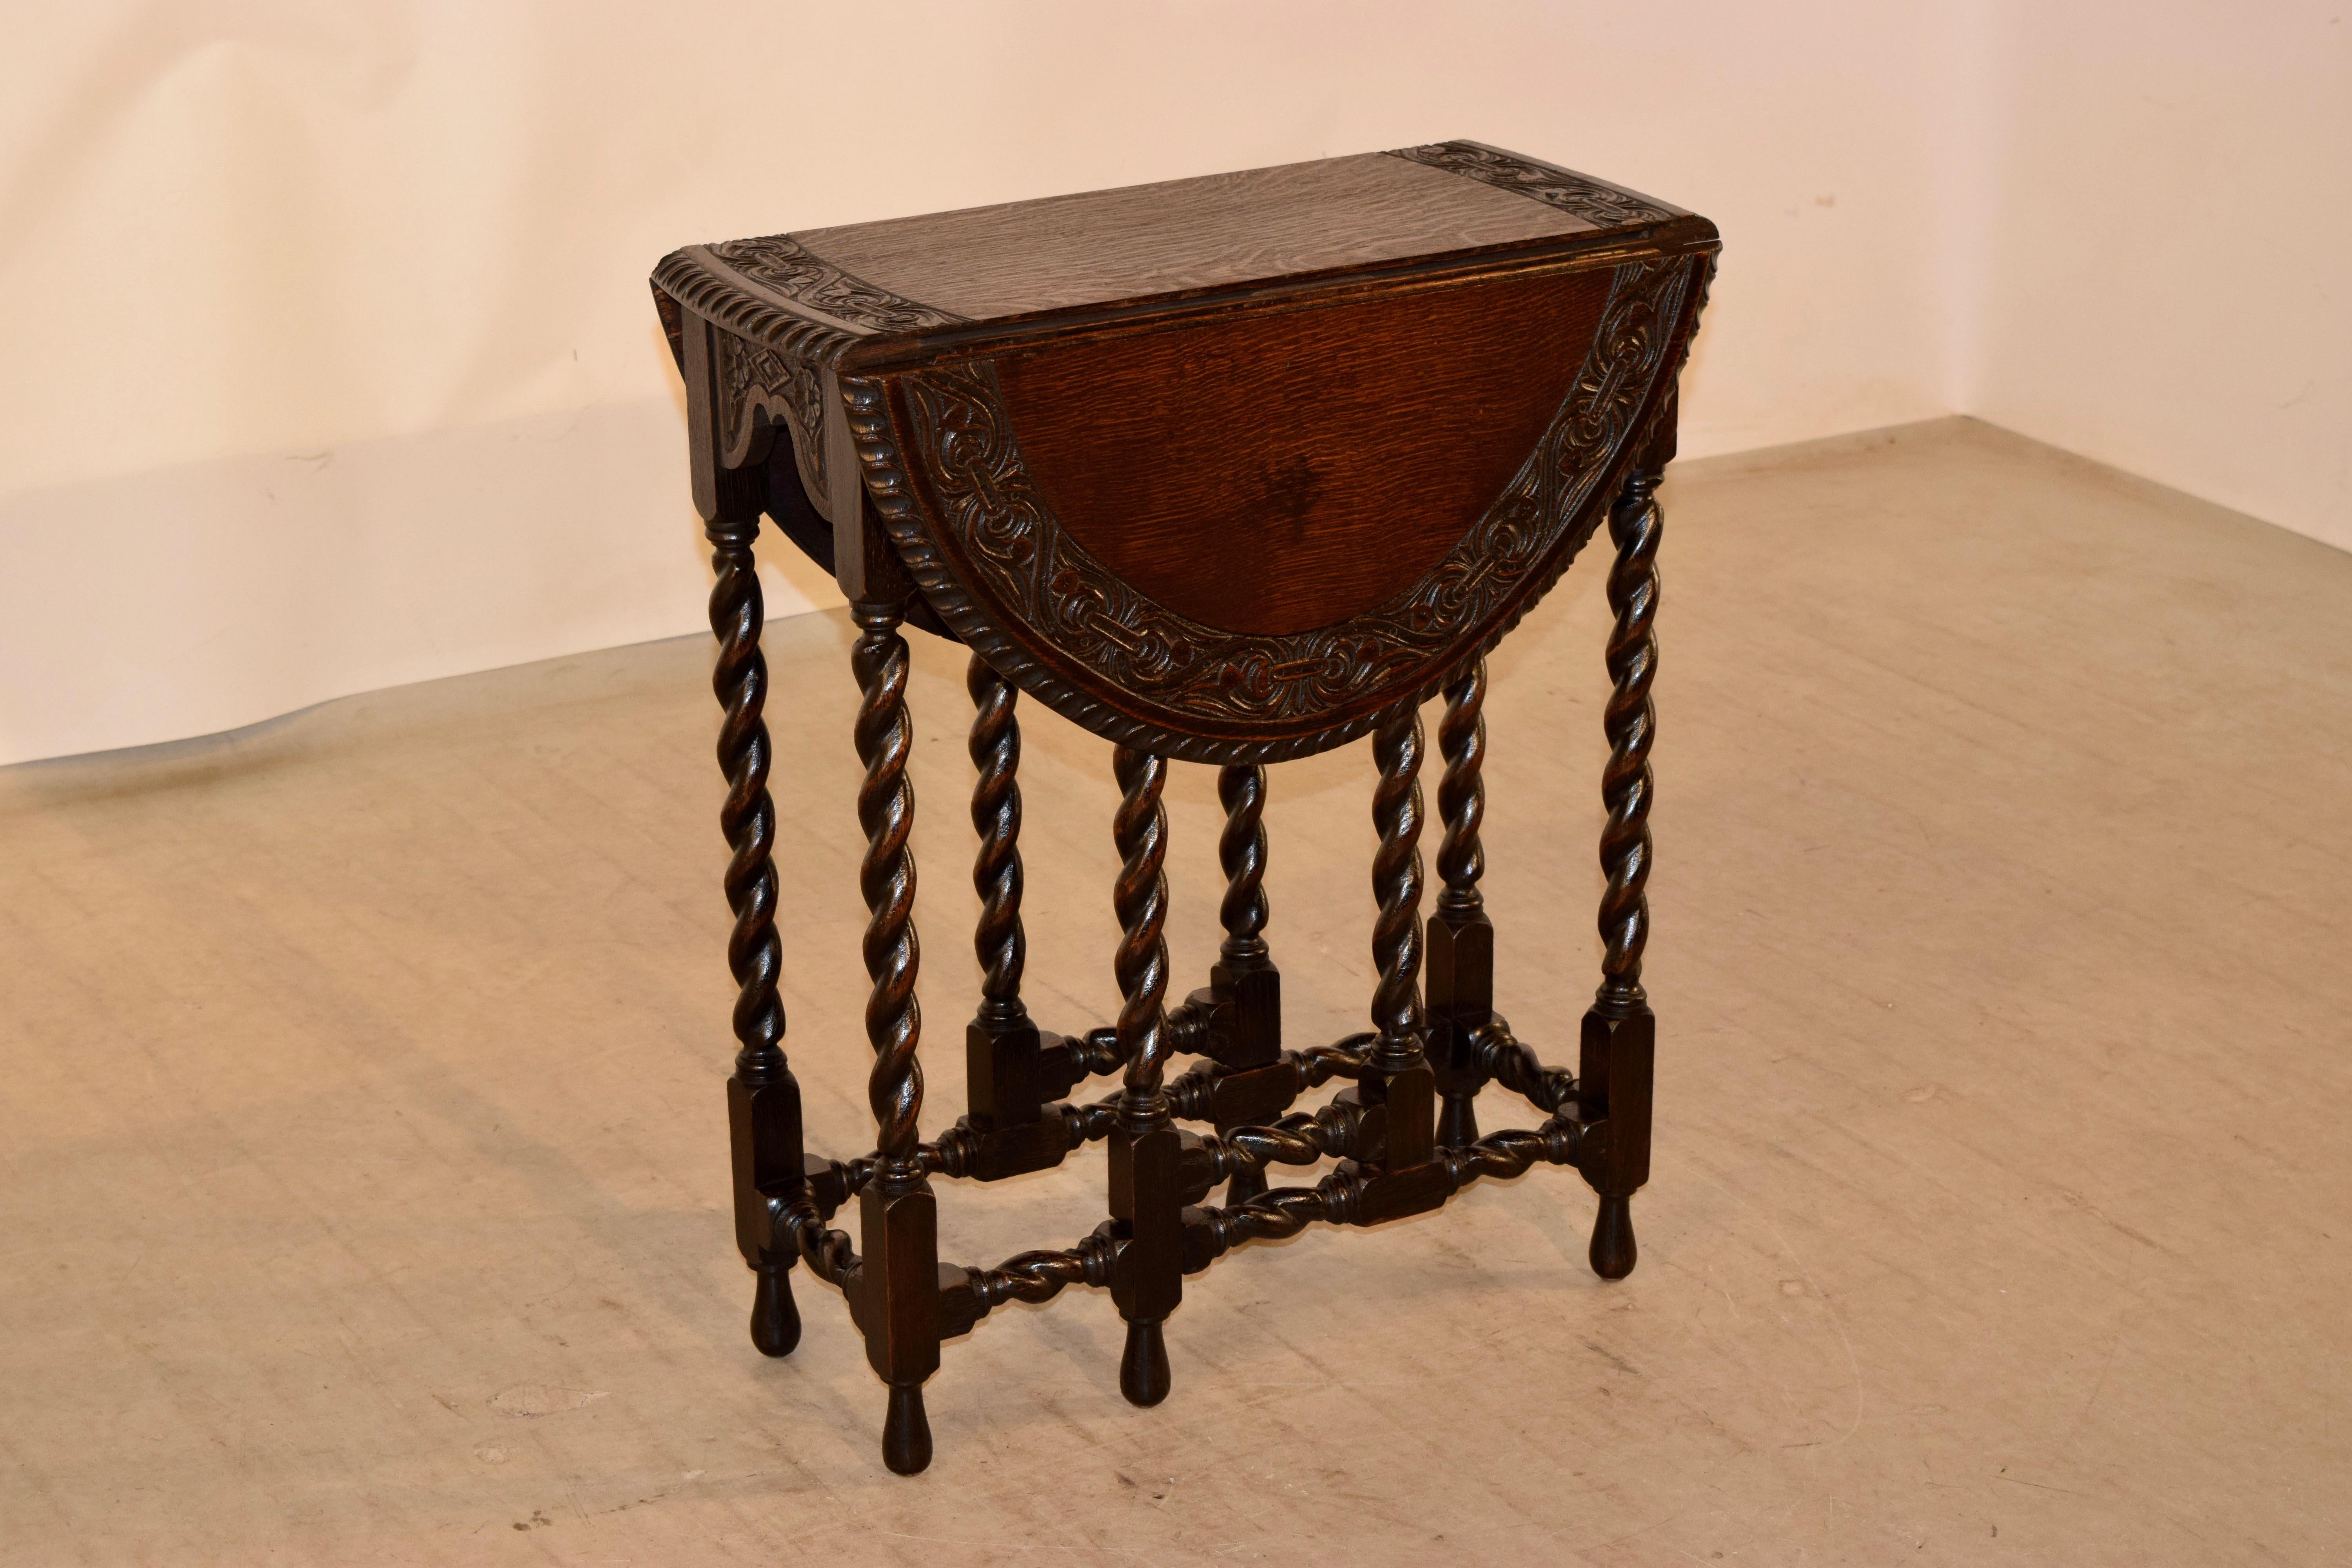 19th century oak gate leg table with a carved border around the top, which is surrounded by a deeply hand carved decorated beveled edge. This follows down to a hand carved and scalloped apron and hand turned barley twist legs and gates, all joined